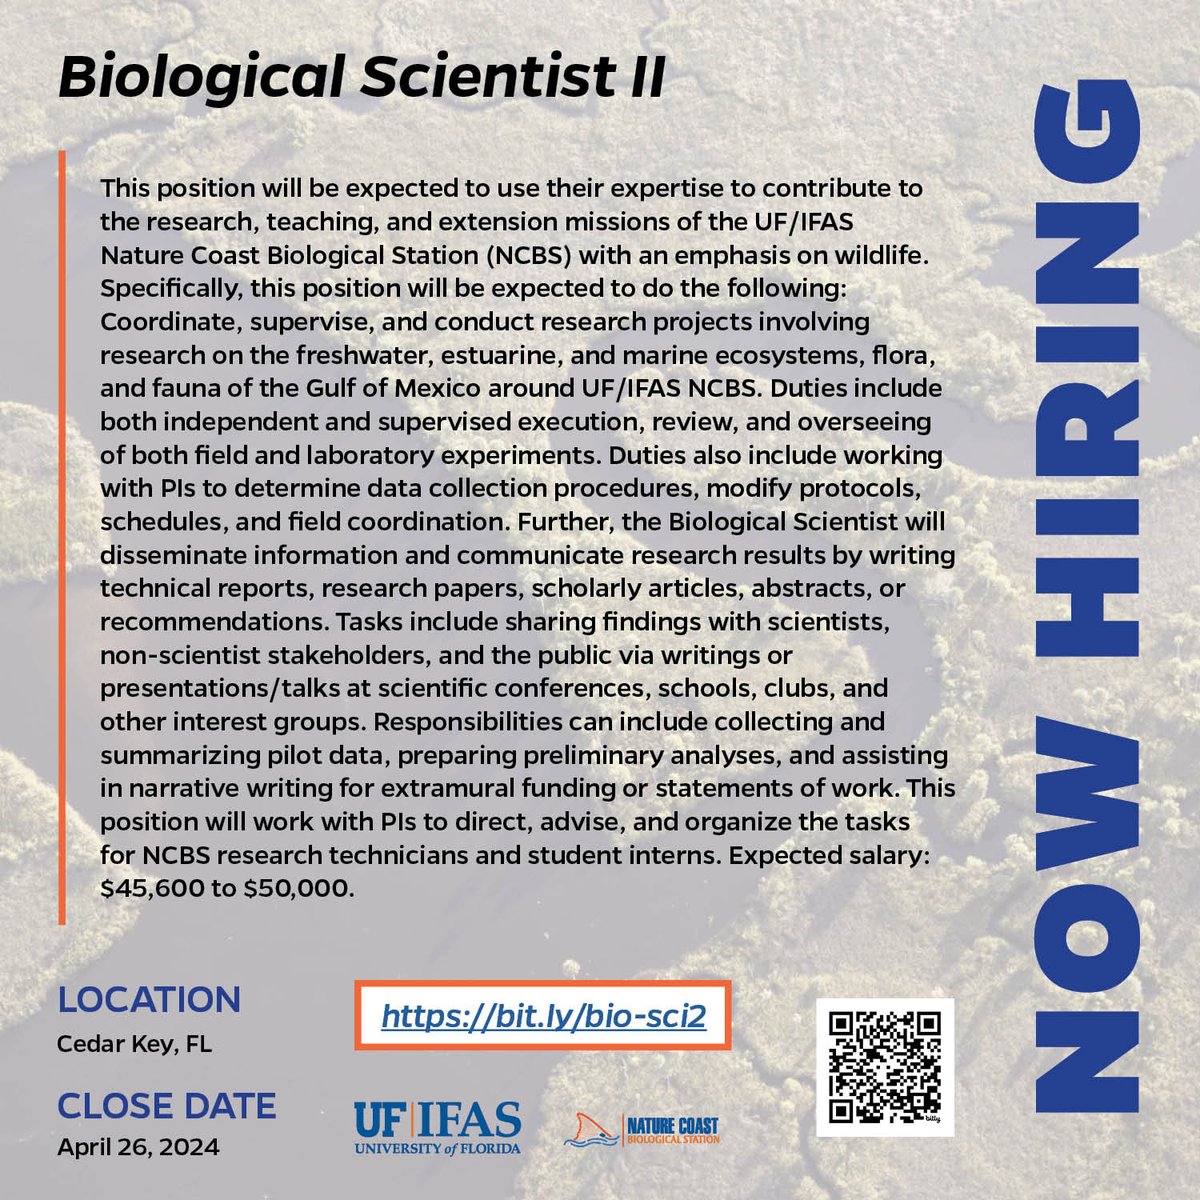 Hiring biological scientist ll! 📣 Are you a bachelors or masters student with experience in field sampling, lab processing, data analysis and scientific writing? Join our crew! Expected salary: $45,600 to $50,000. Apply by 4/26 at the link 🔗 bit.ly/bio-sci2